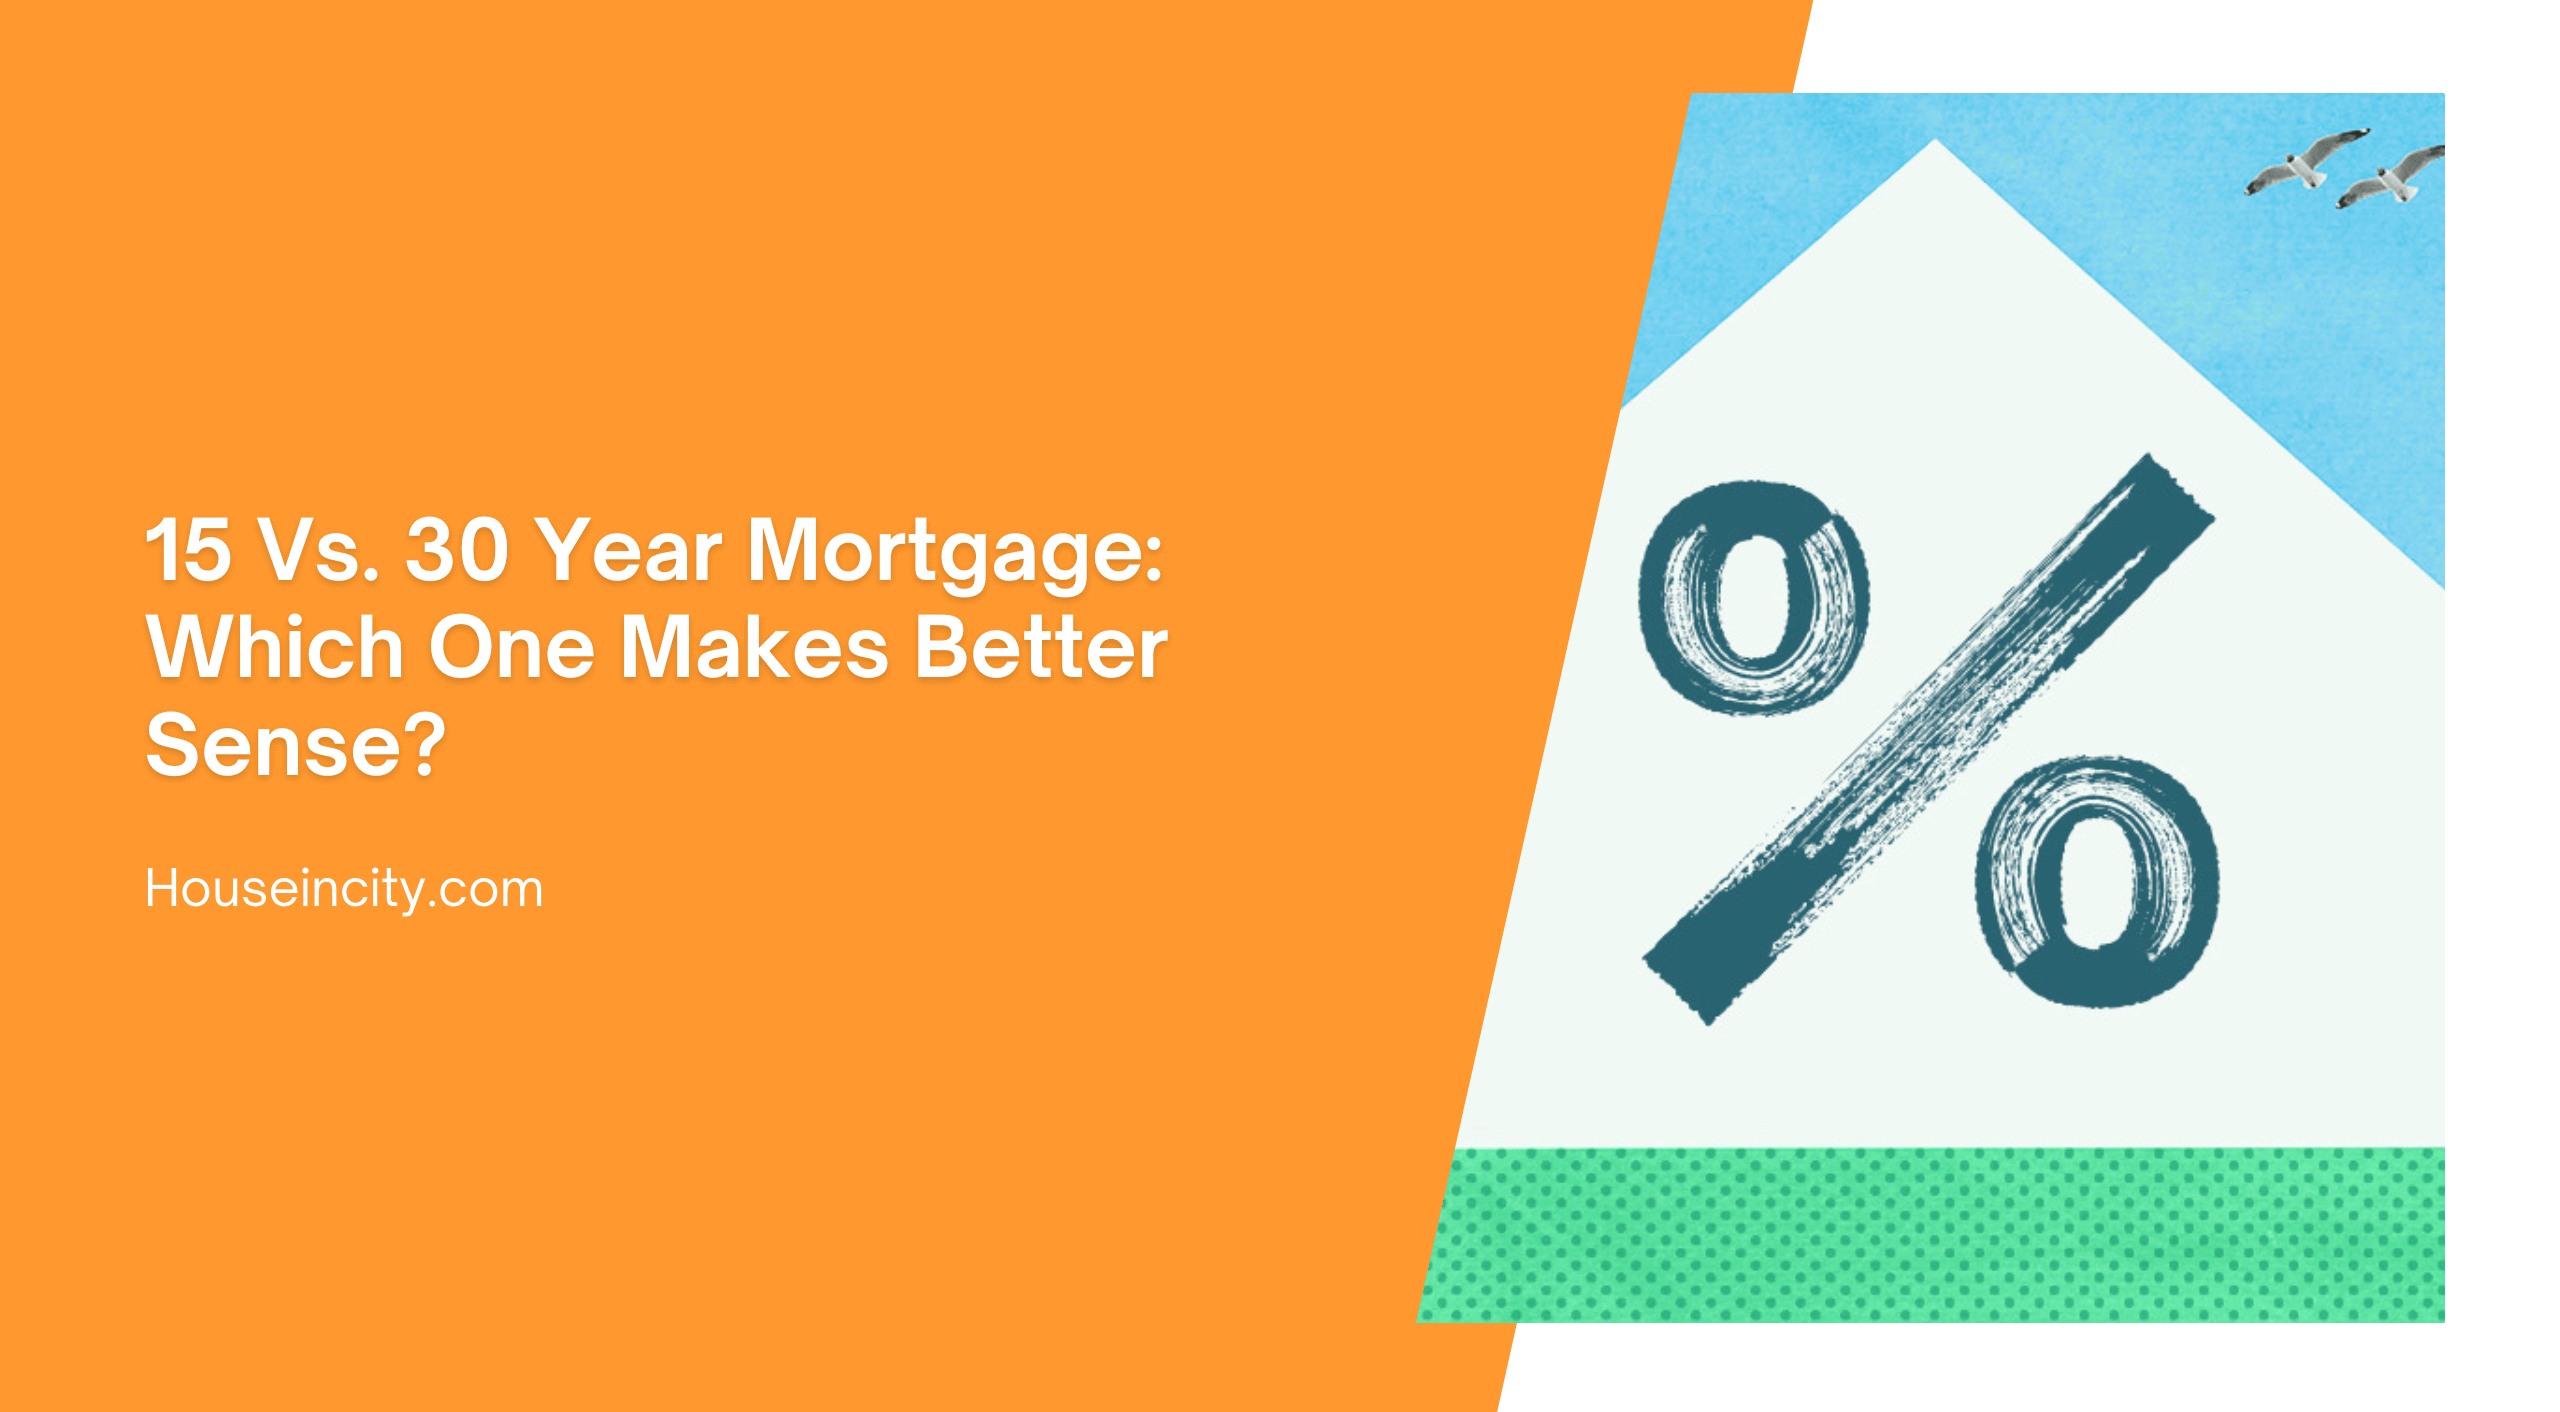 15 Vs. 30 Year Mortgage: Which One Makes Better Sense?